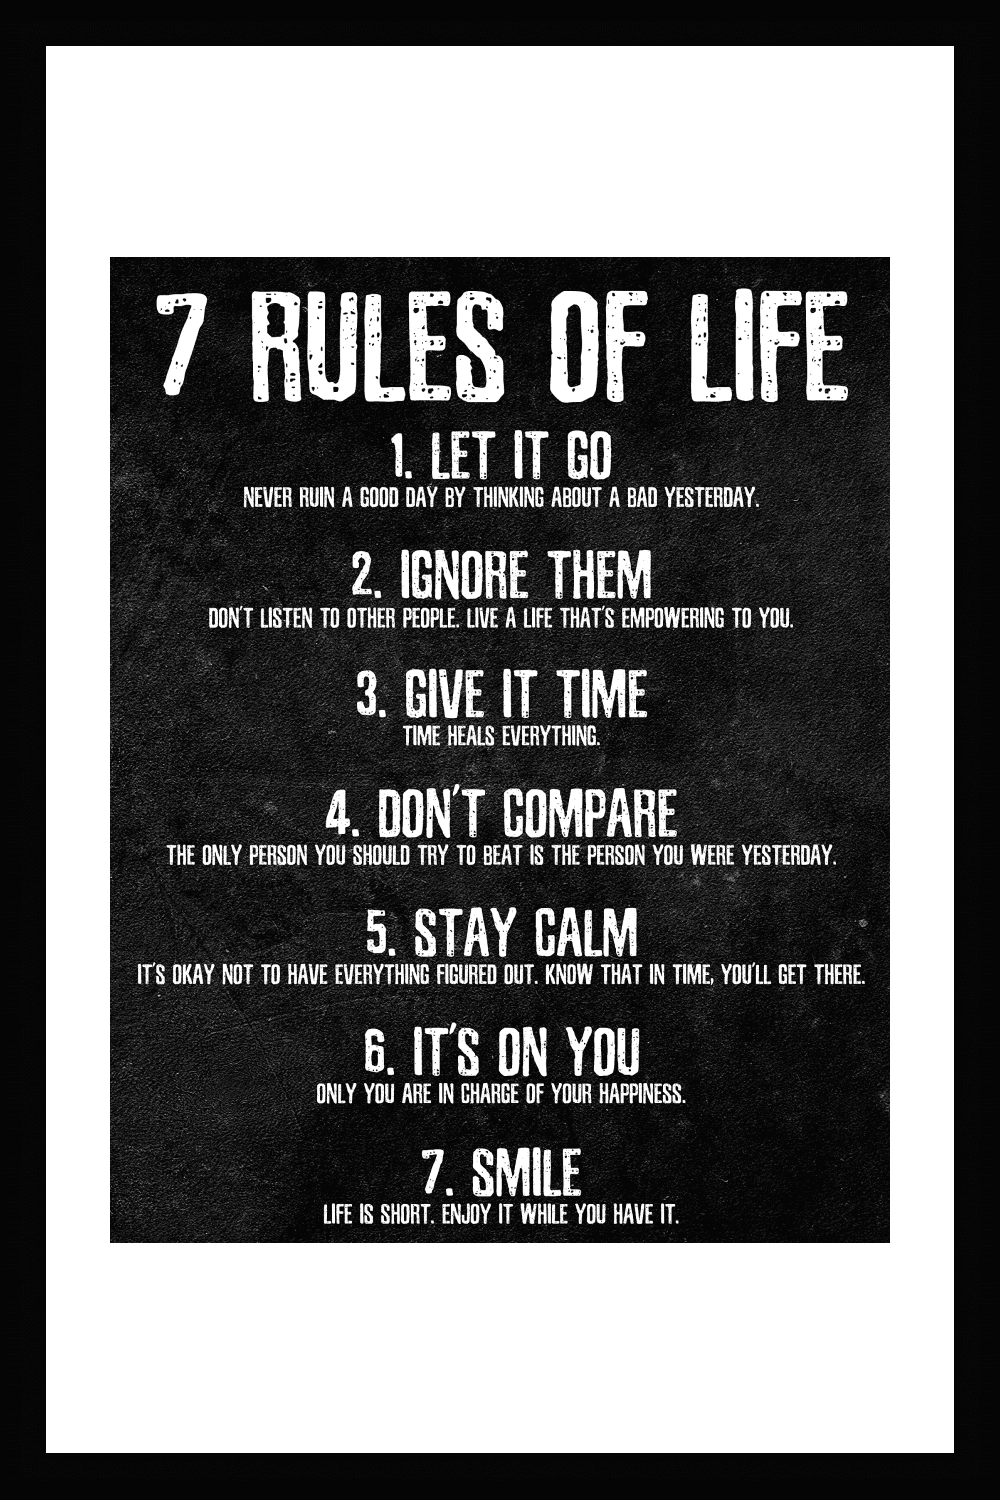 The cover of the book 7 Rules of Life Motivational Poster.